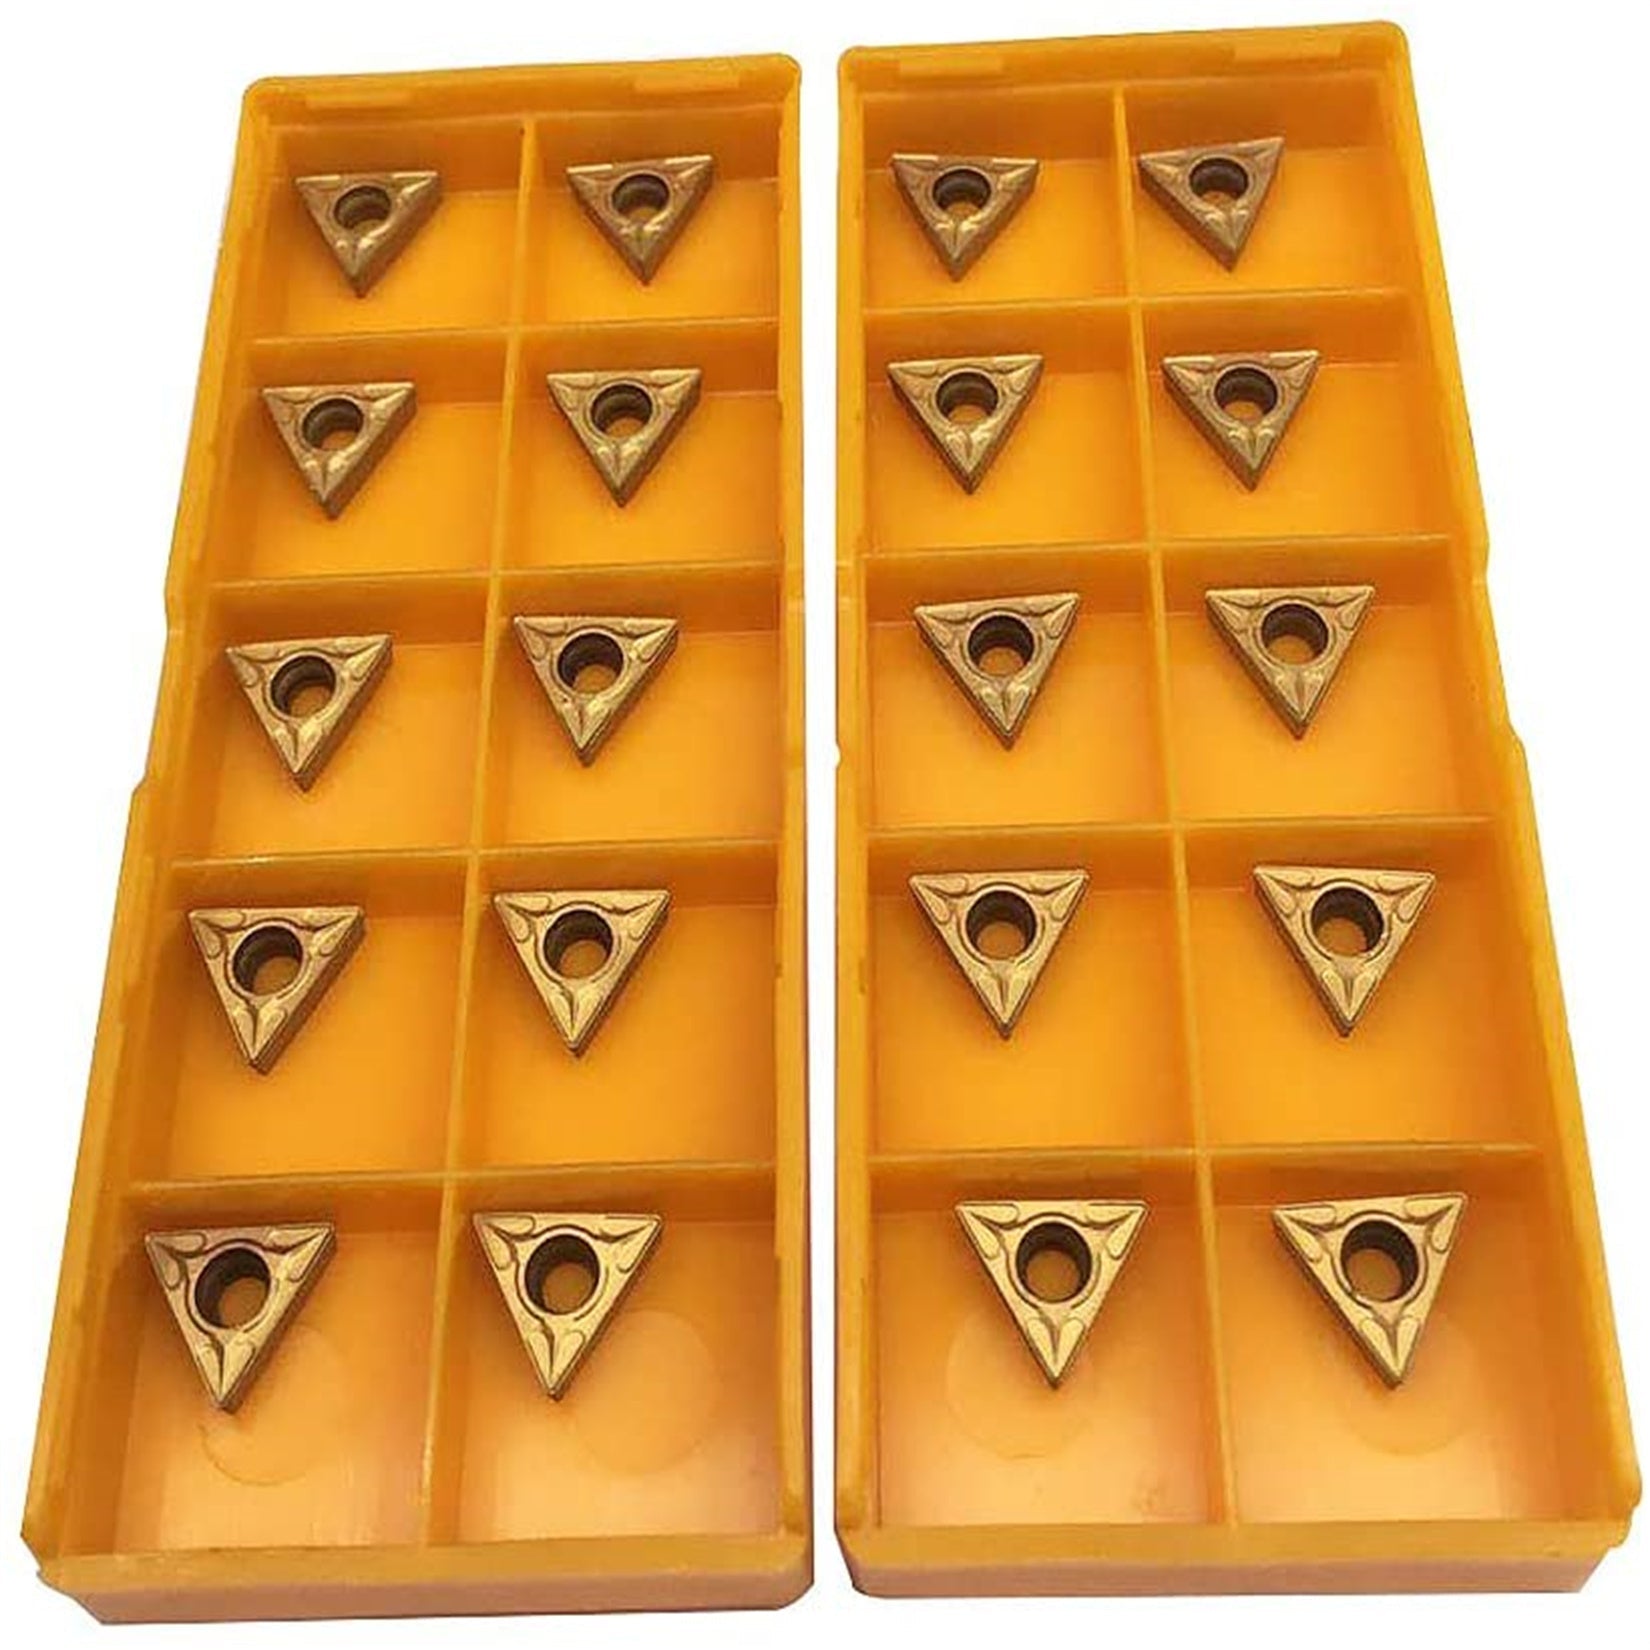 findmall  20Pcs TCMT21.51 TCMT110204 Carbide Turning Inserts Mutilayer Coated Fit for Lathe Turning Tool Holder Boring Bar FINDMALLPARTS